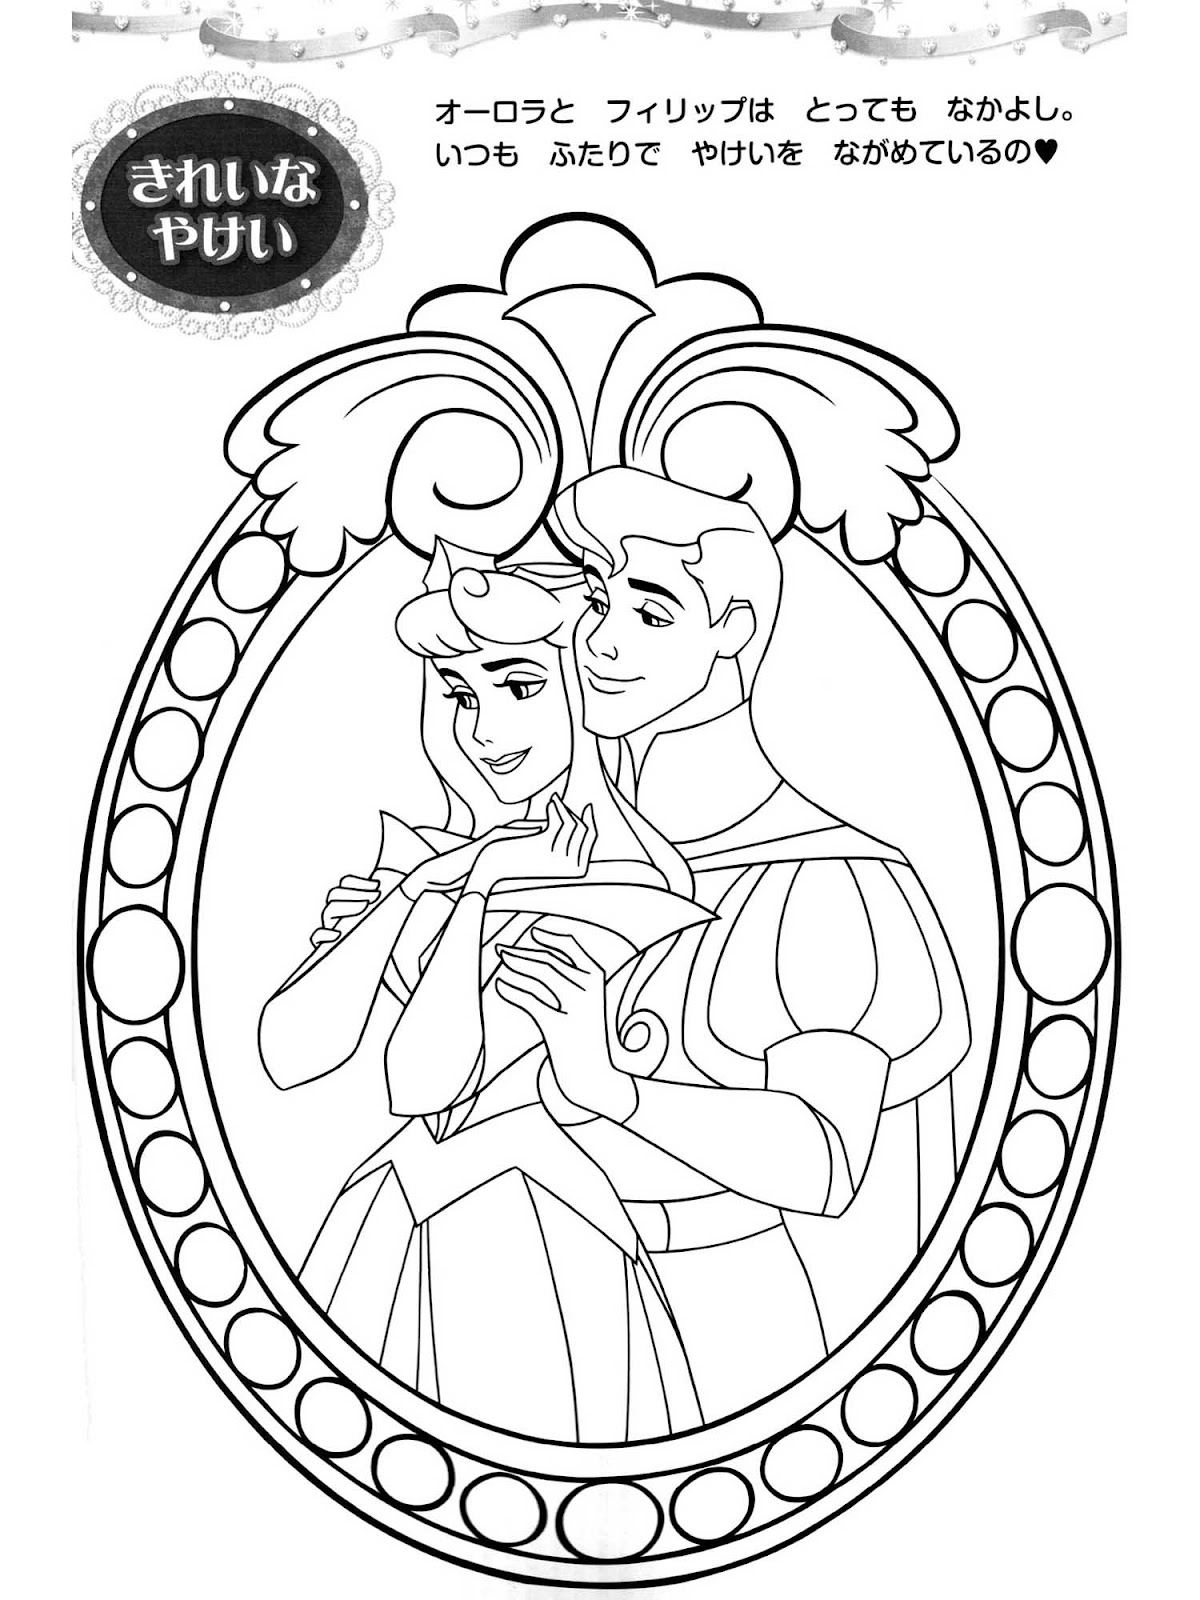 Download Sleeping Beauty Coloring Pages